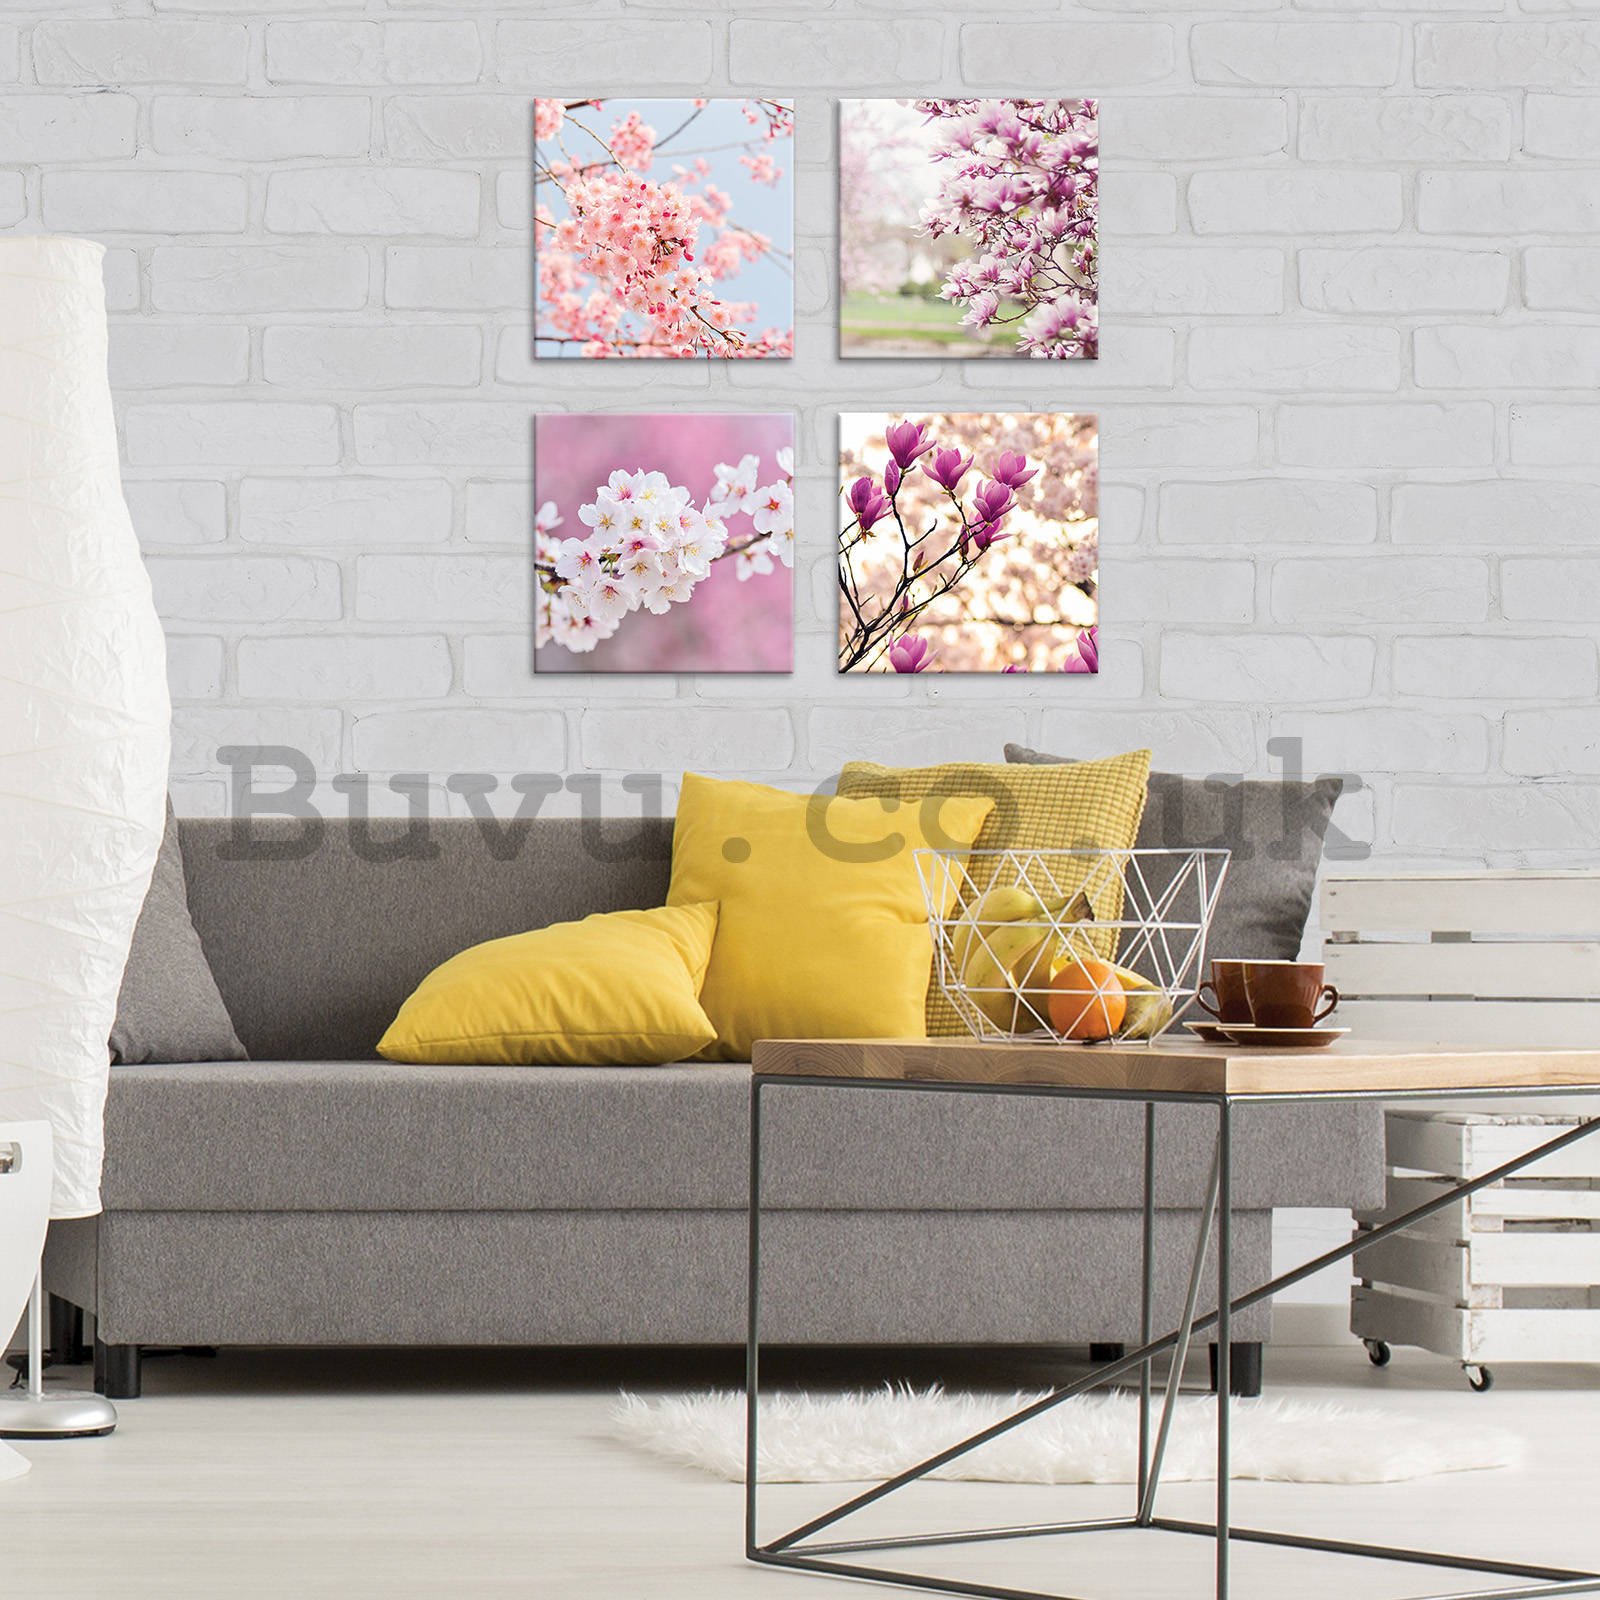 Painting on canvas: Blossoming cherries (1) - set 4pcs 25x25cm